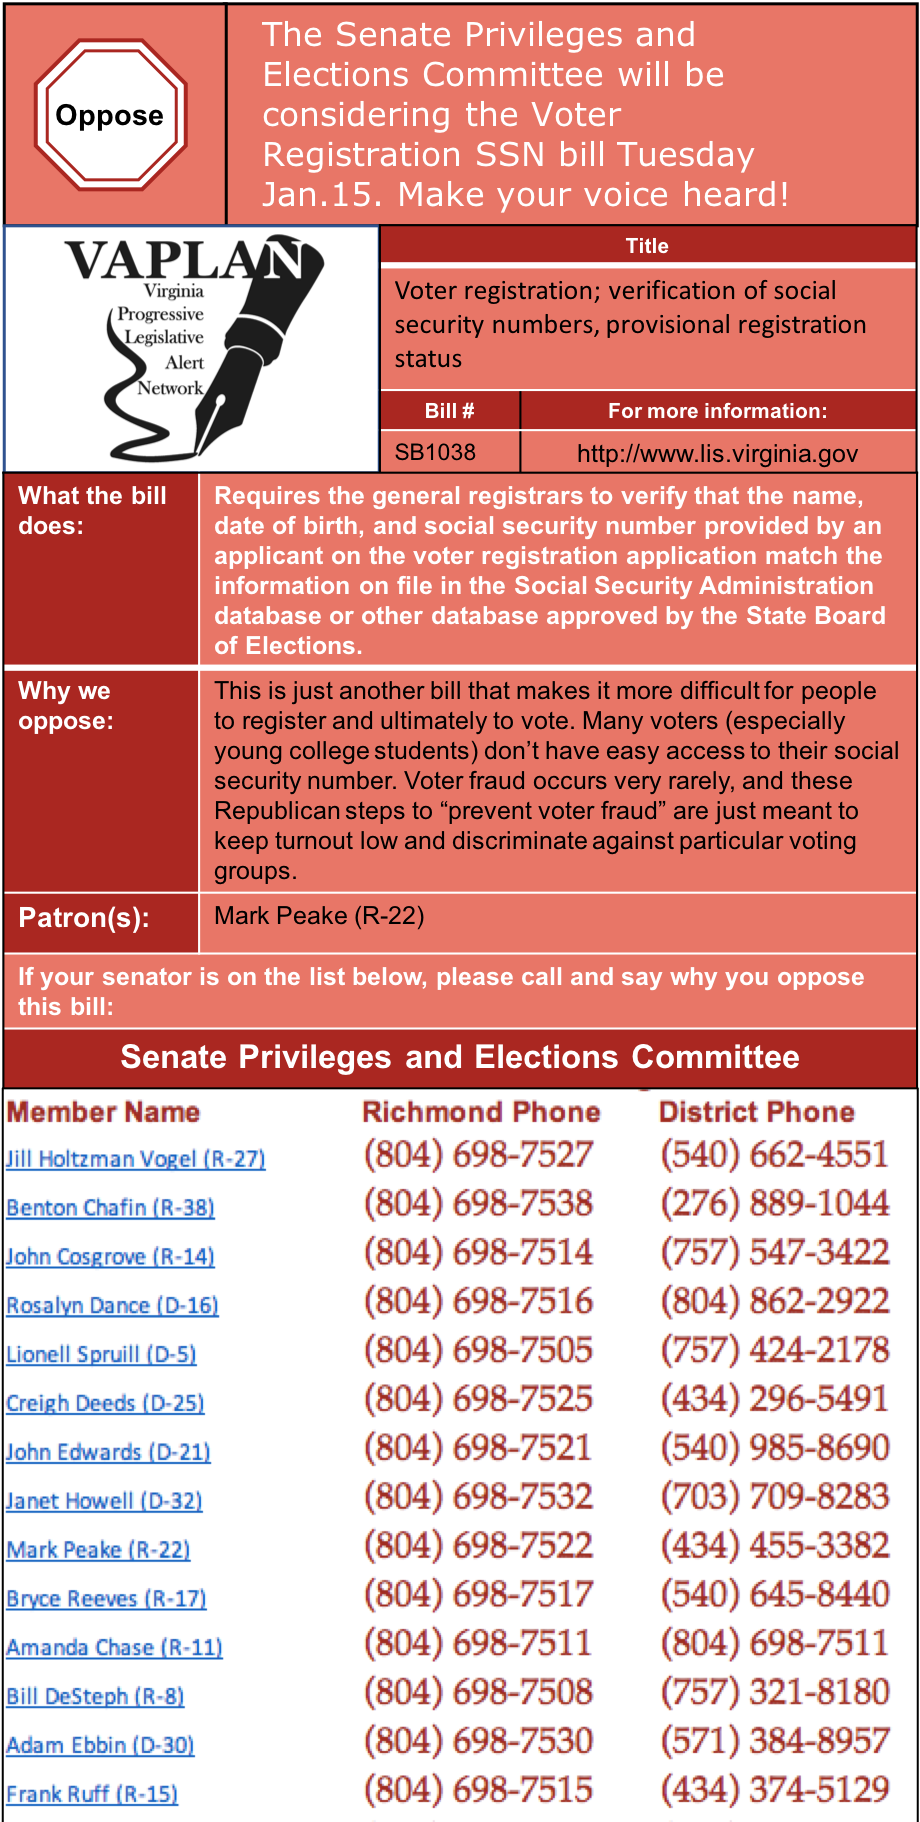 ALERT: Oppose requiring SSN on voter registration (SB1038) in Senate Privileges and Elections Tues Jan. 15